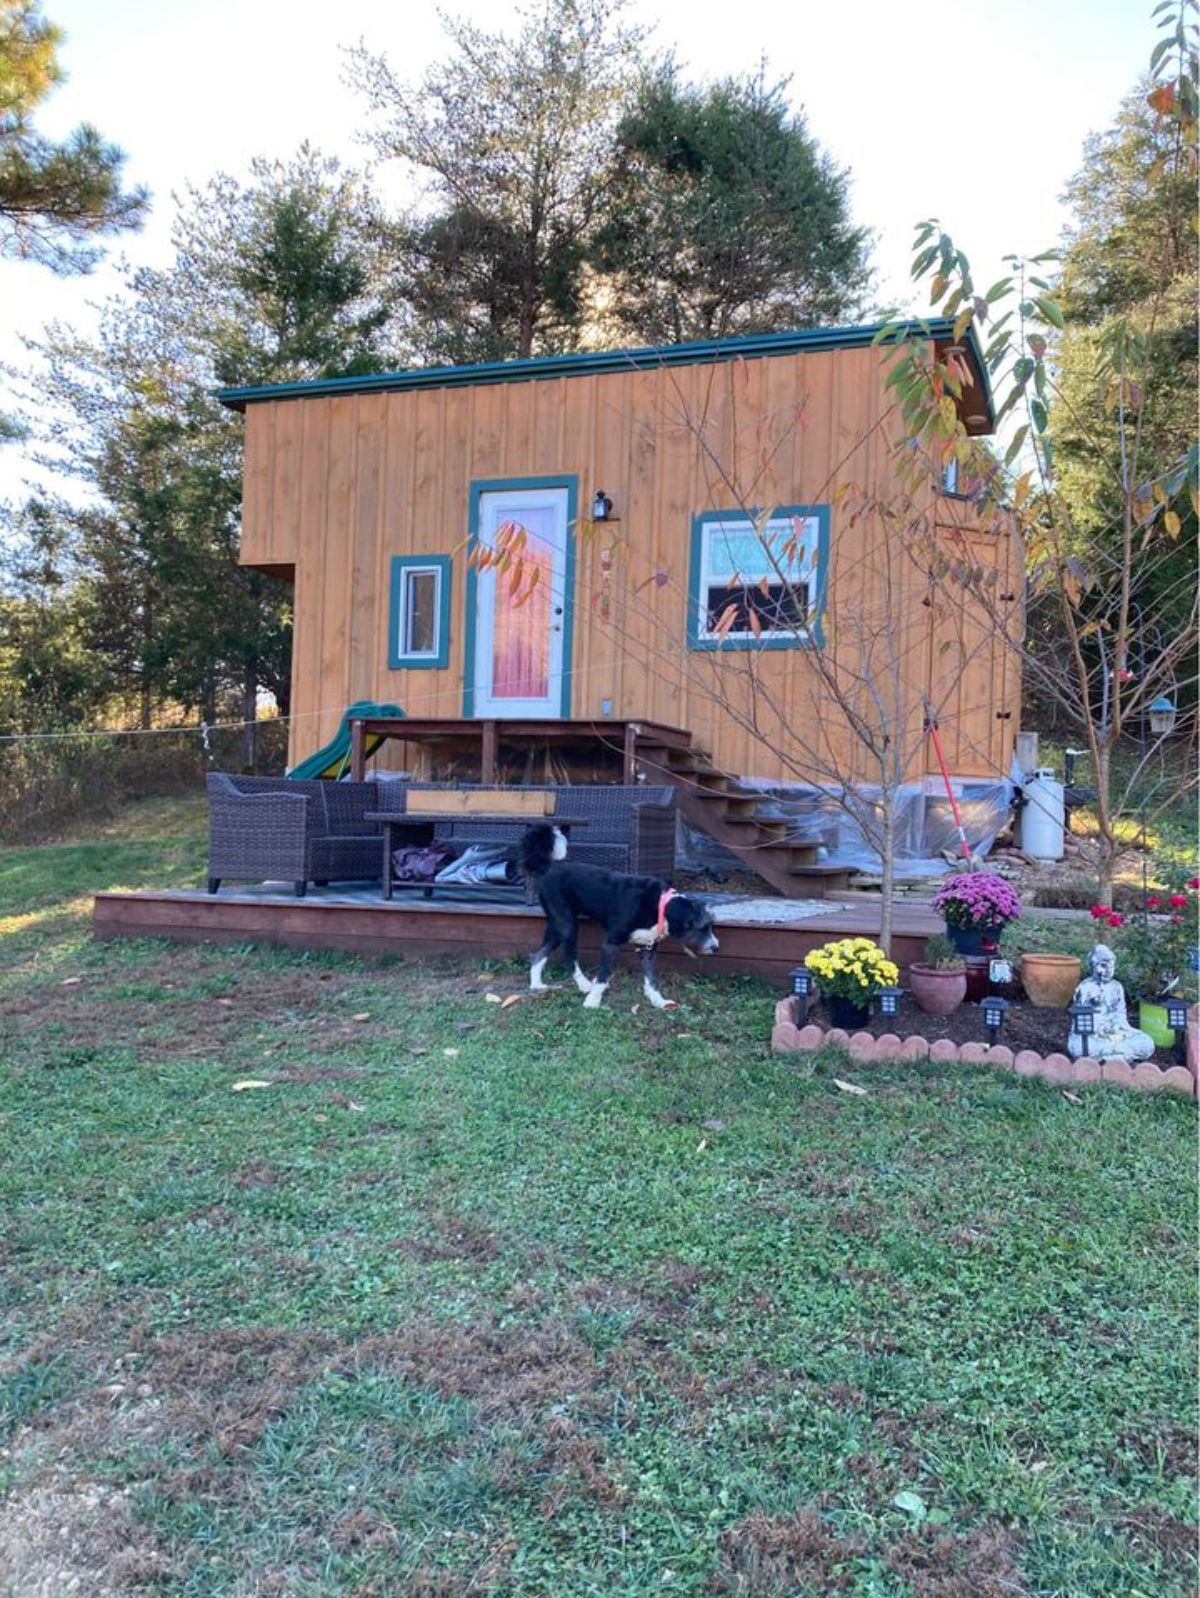 Front view of 18' Tiny House from outside